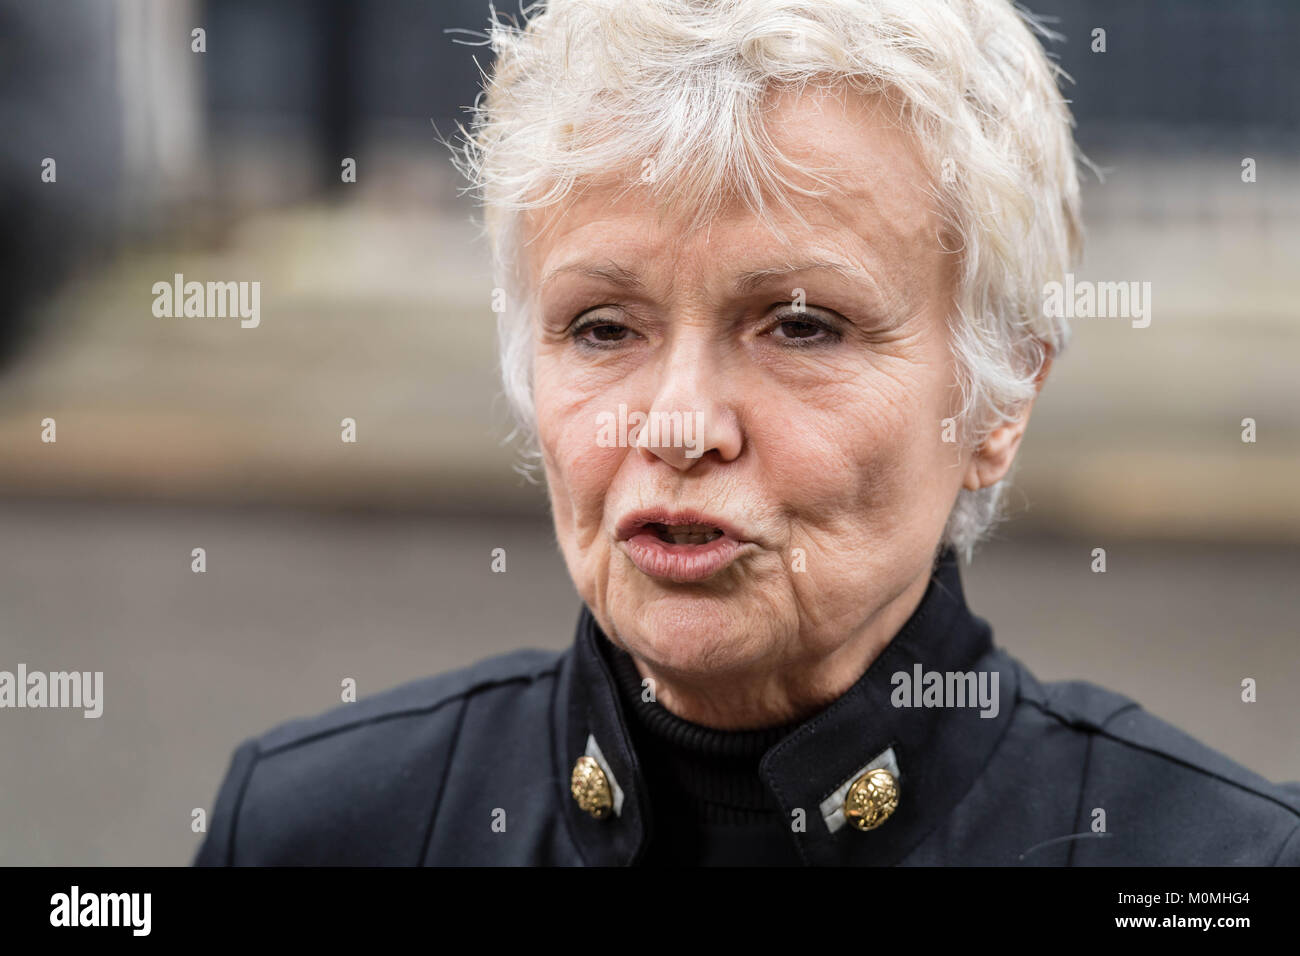 London, 23rd January 2018, Dame Julie Walters, actress and writer  arrives in Downing Street to present a Woman's Aid petition against proposed changes in funding for Women's refuges. Credit: Ian Davidson/Alamy Live News Stock Photo